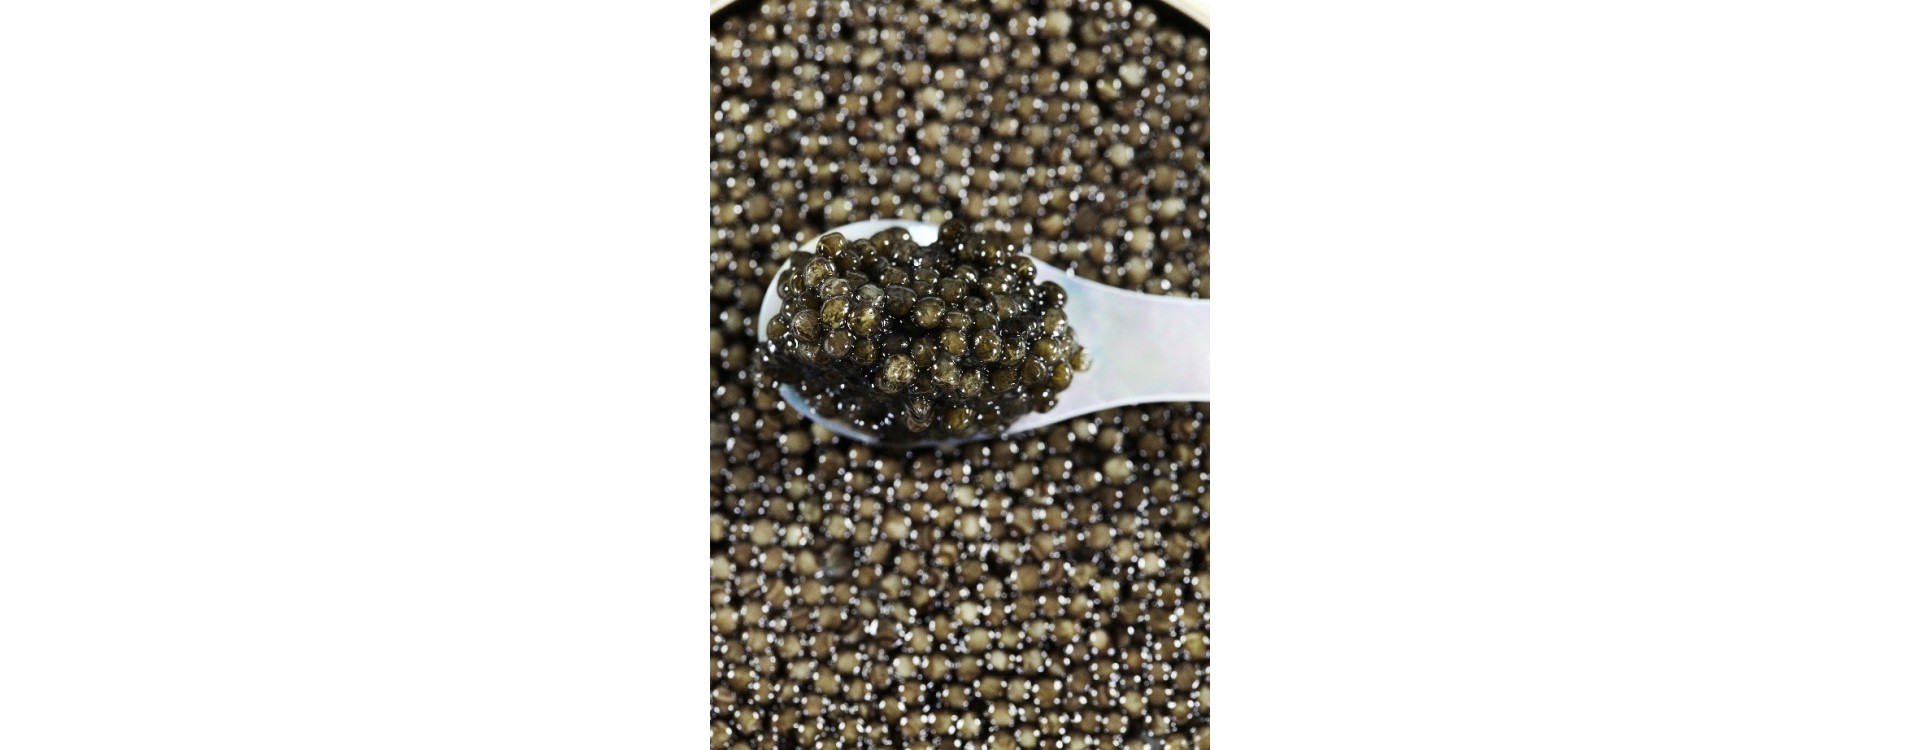 Caviar Perle Noire, a range for all palates